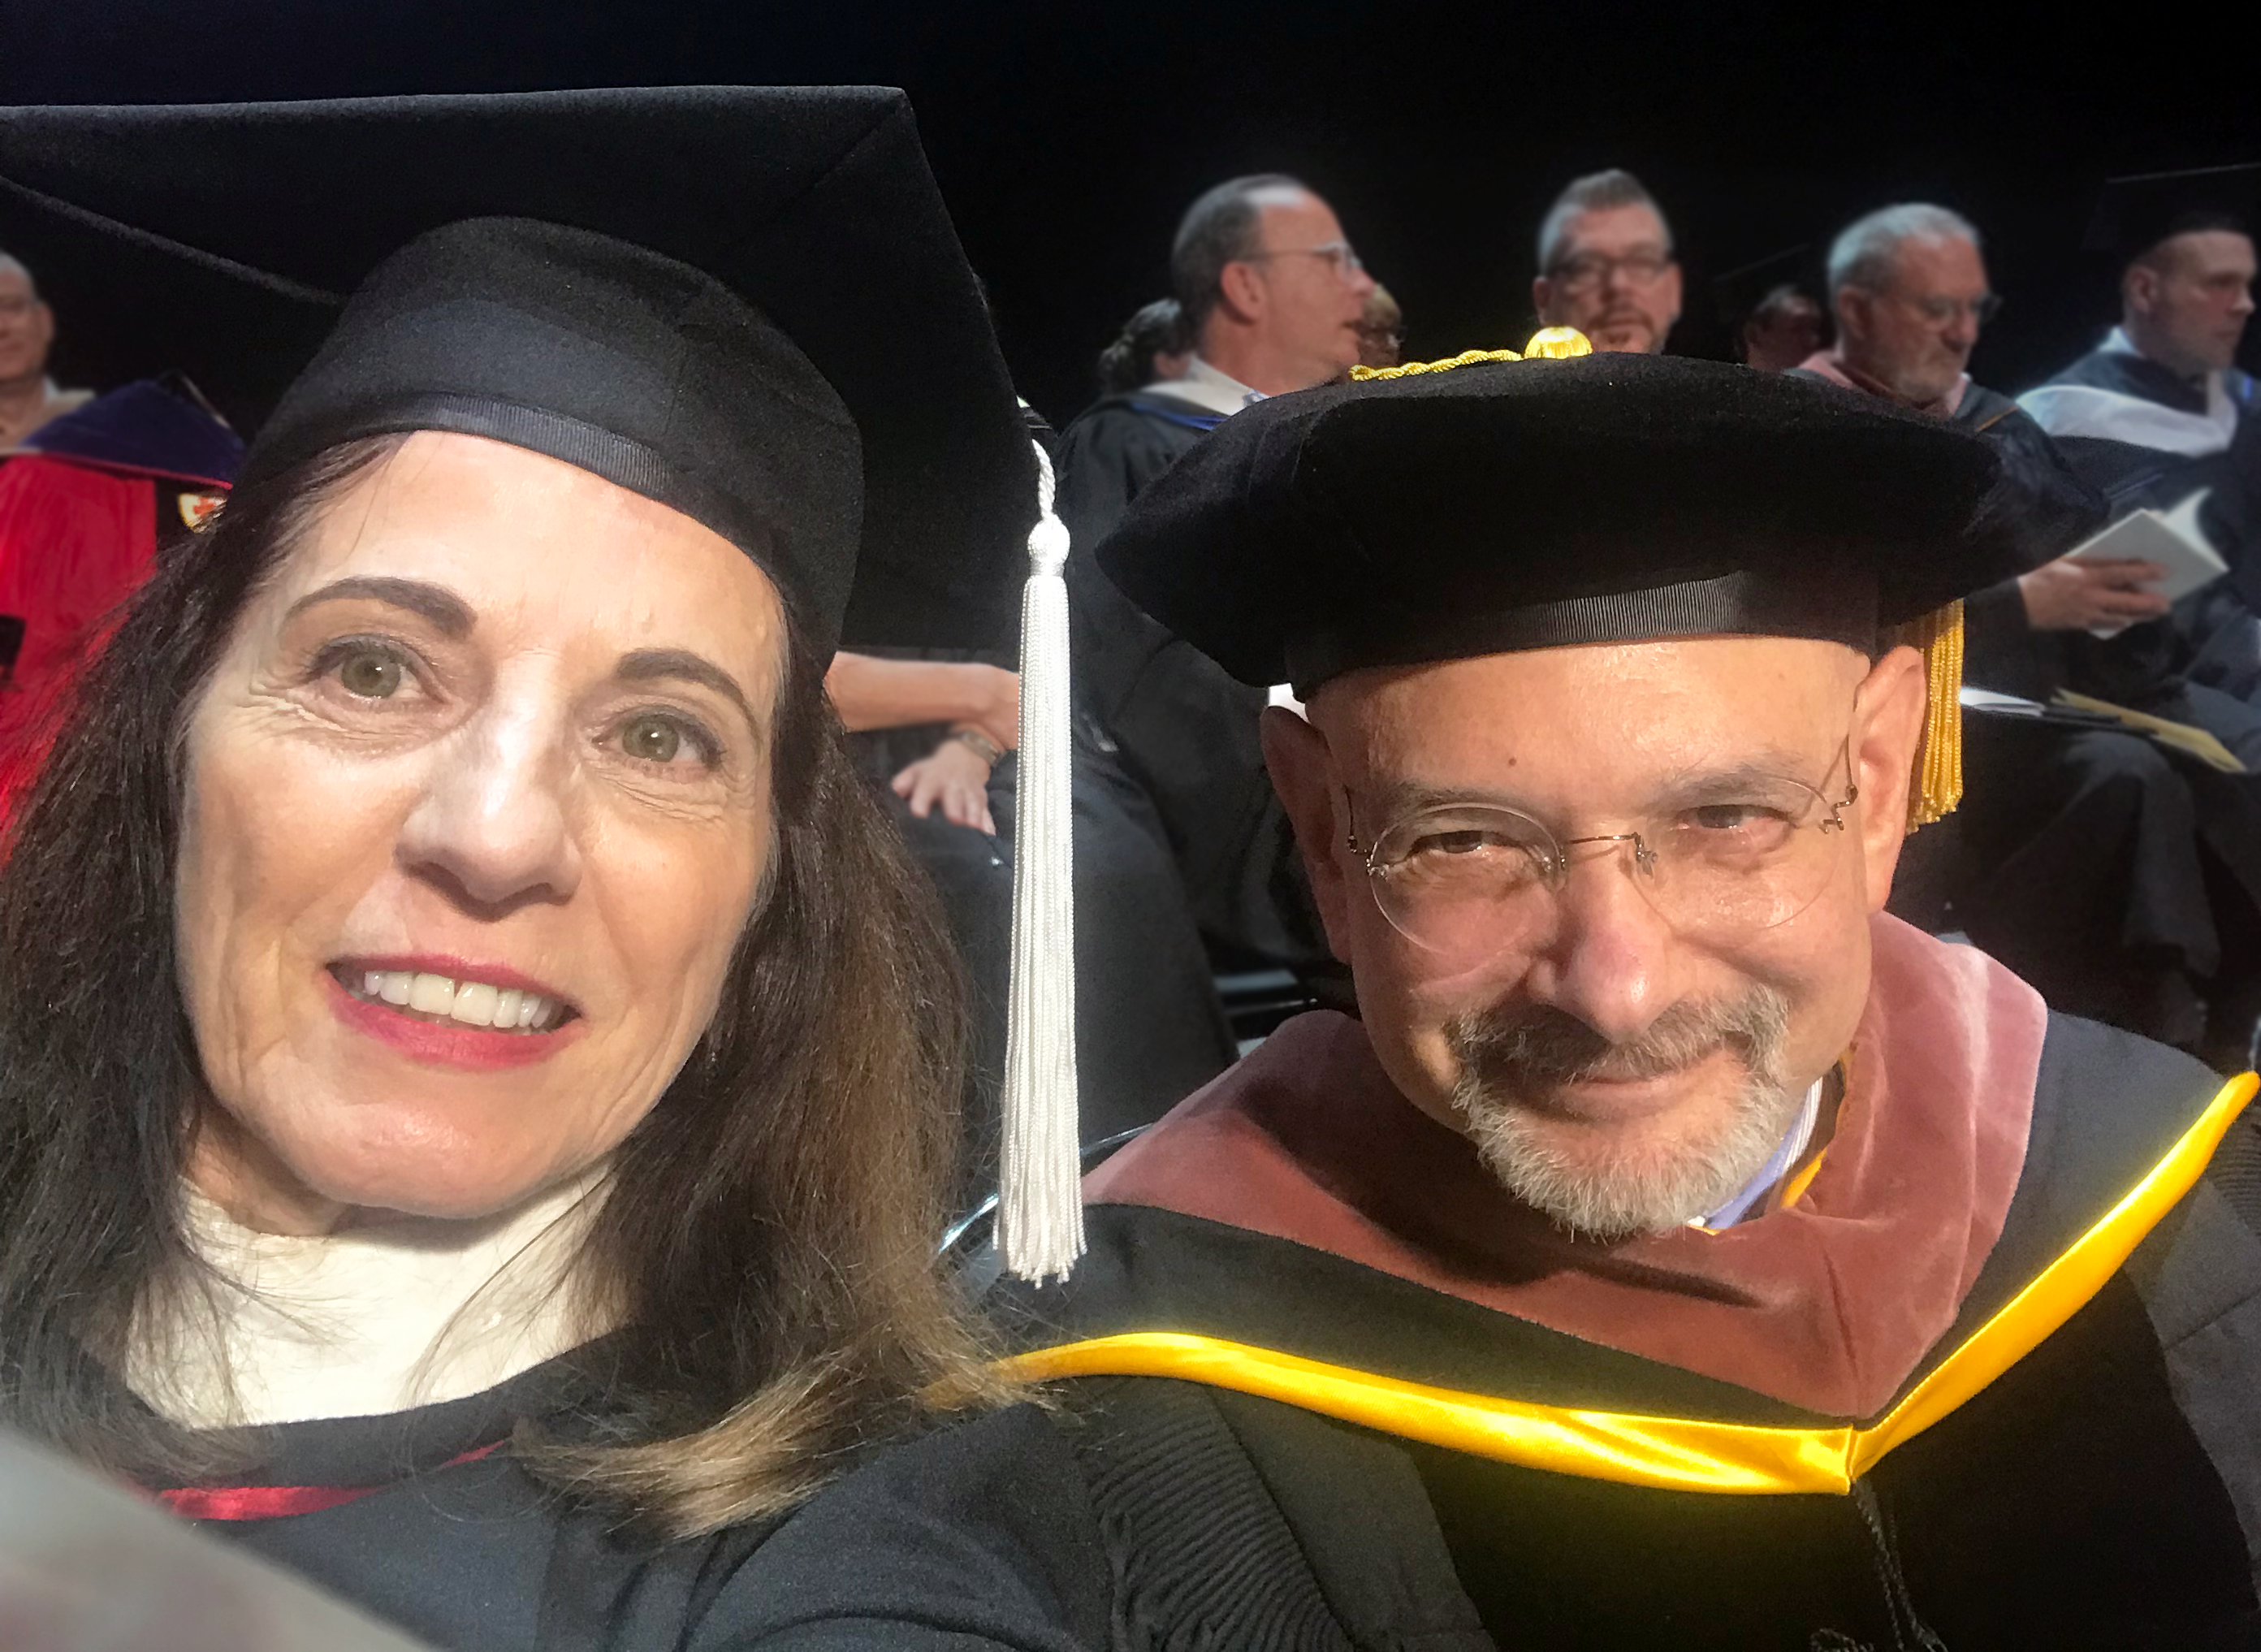 A photo of two teachers wearing academic robes and hats for the graduation ceremony.